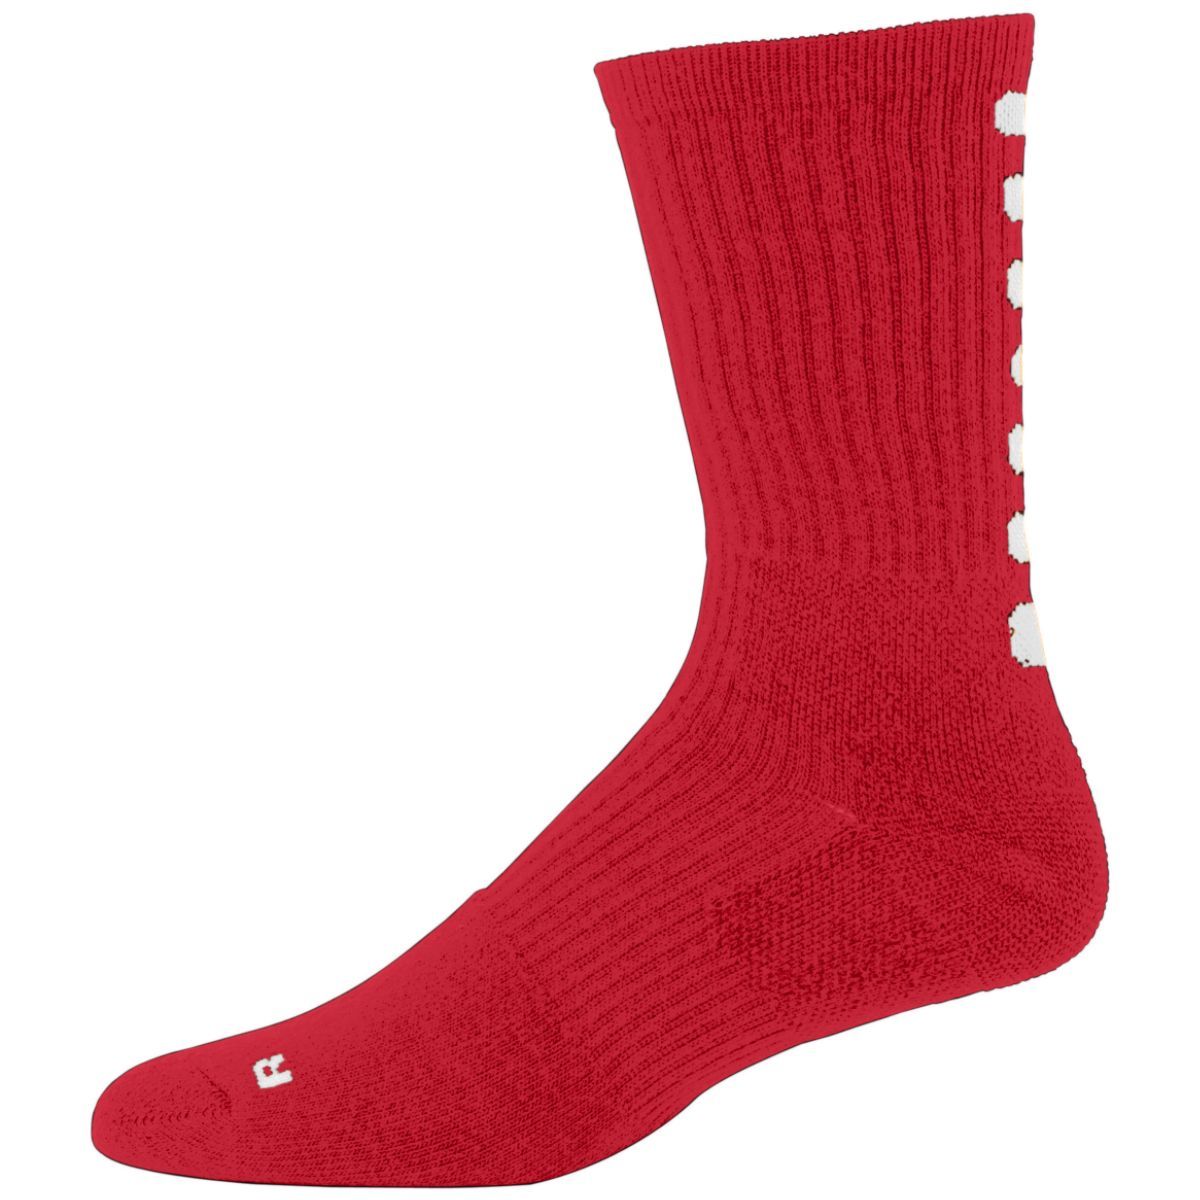 Augusta Sportswear Color Block Crew Sock in Red/White  -Part of the Adult, Augusta-Products, Accessories-Socks product lines at KanaleyCreations.com